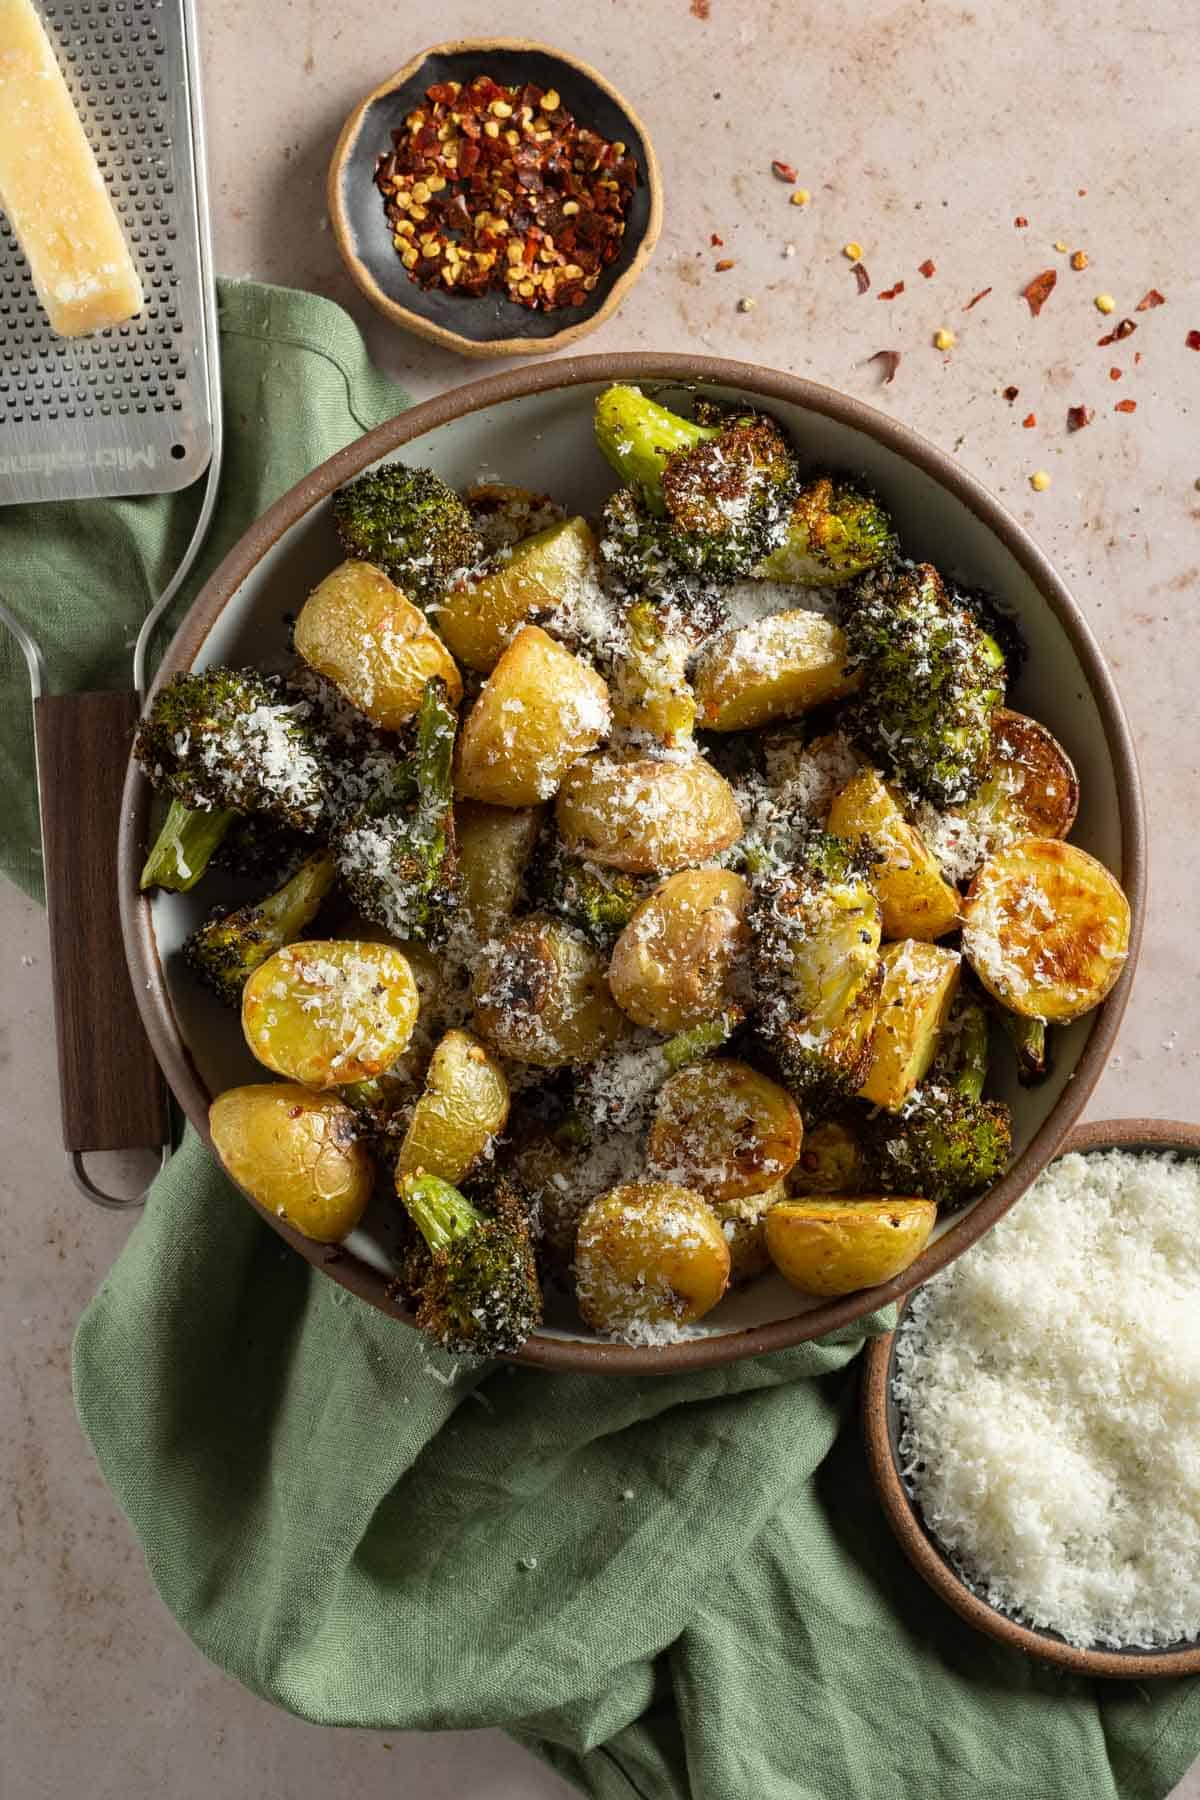 Roasted potatoes and broccoli in a serving bowl topped with parmesan.